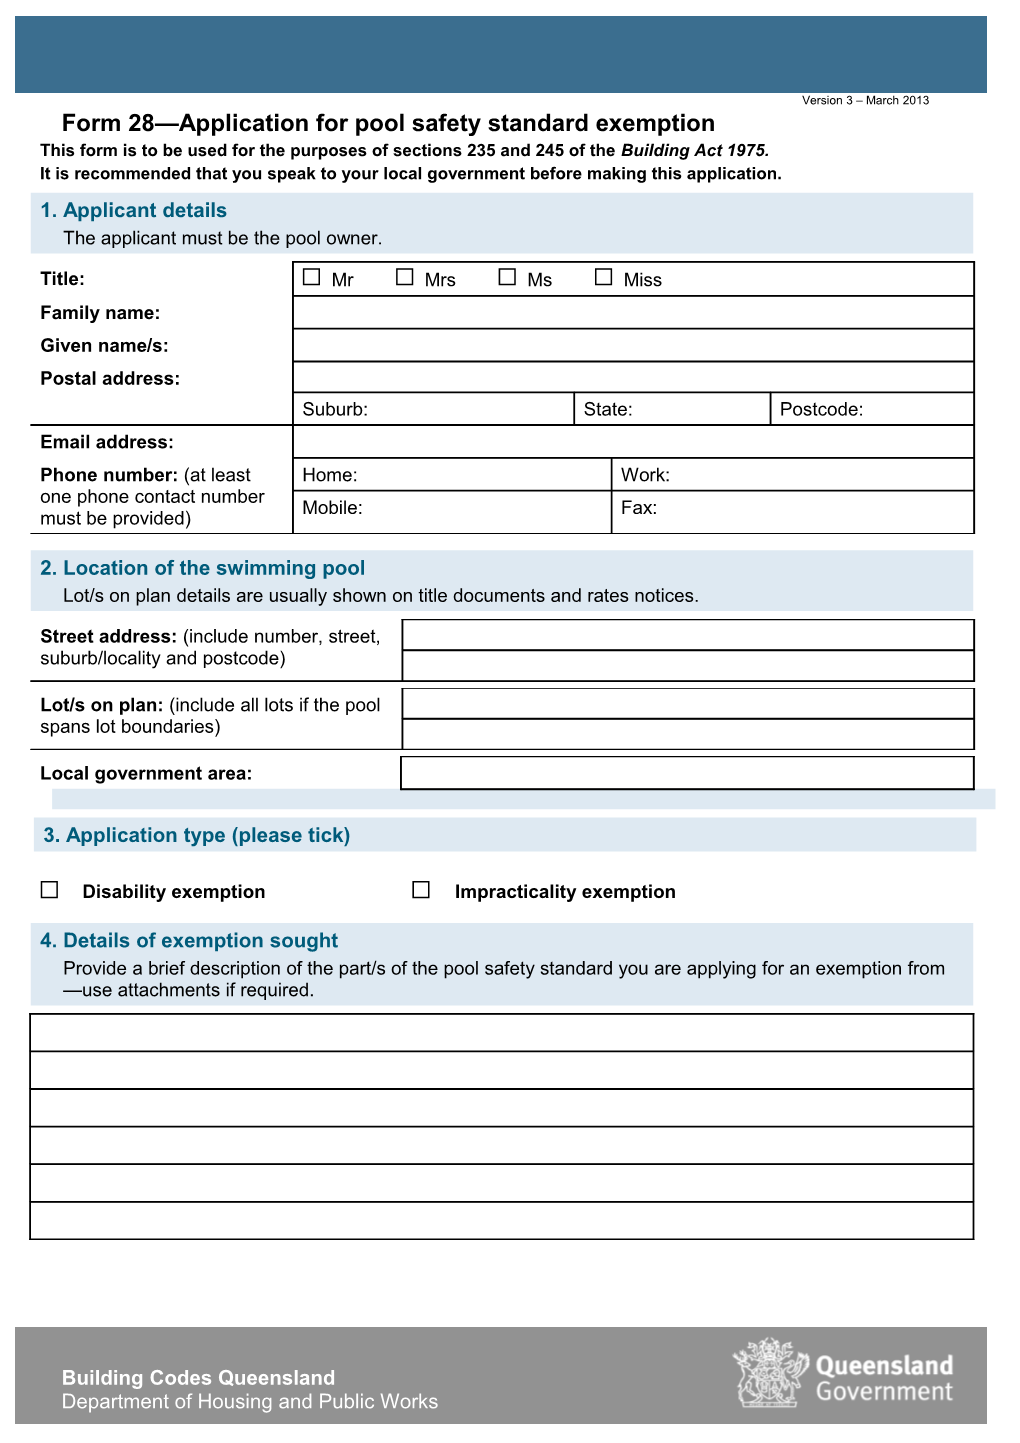 Form 28 Application for Pool Safety Standard Exemption